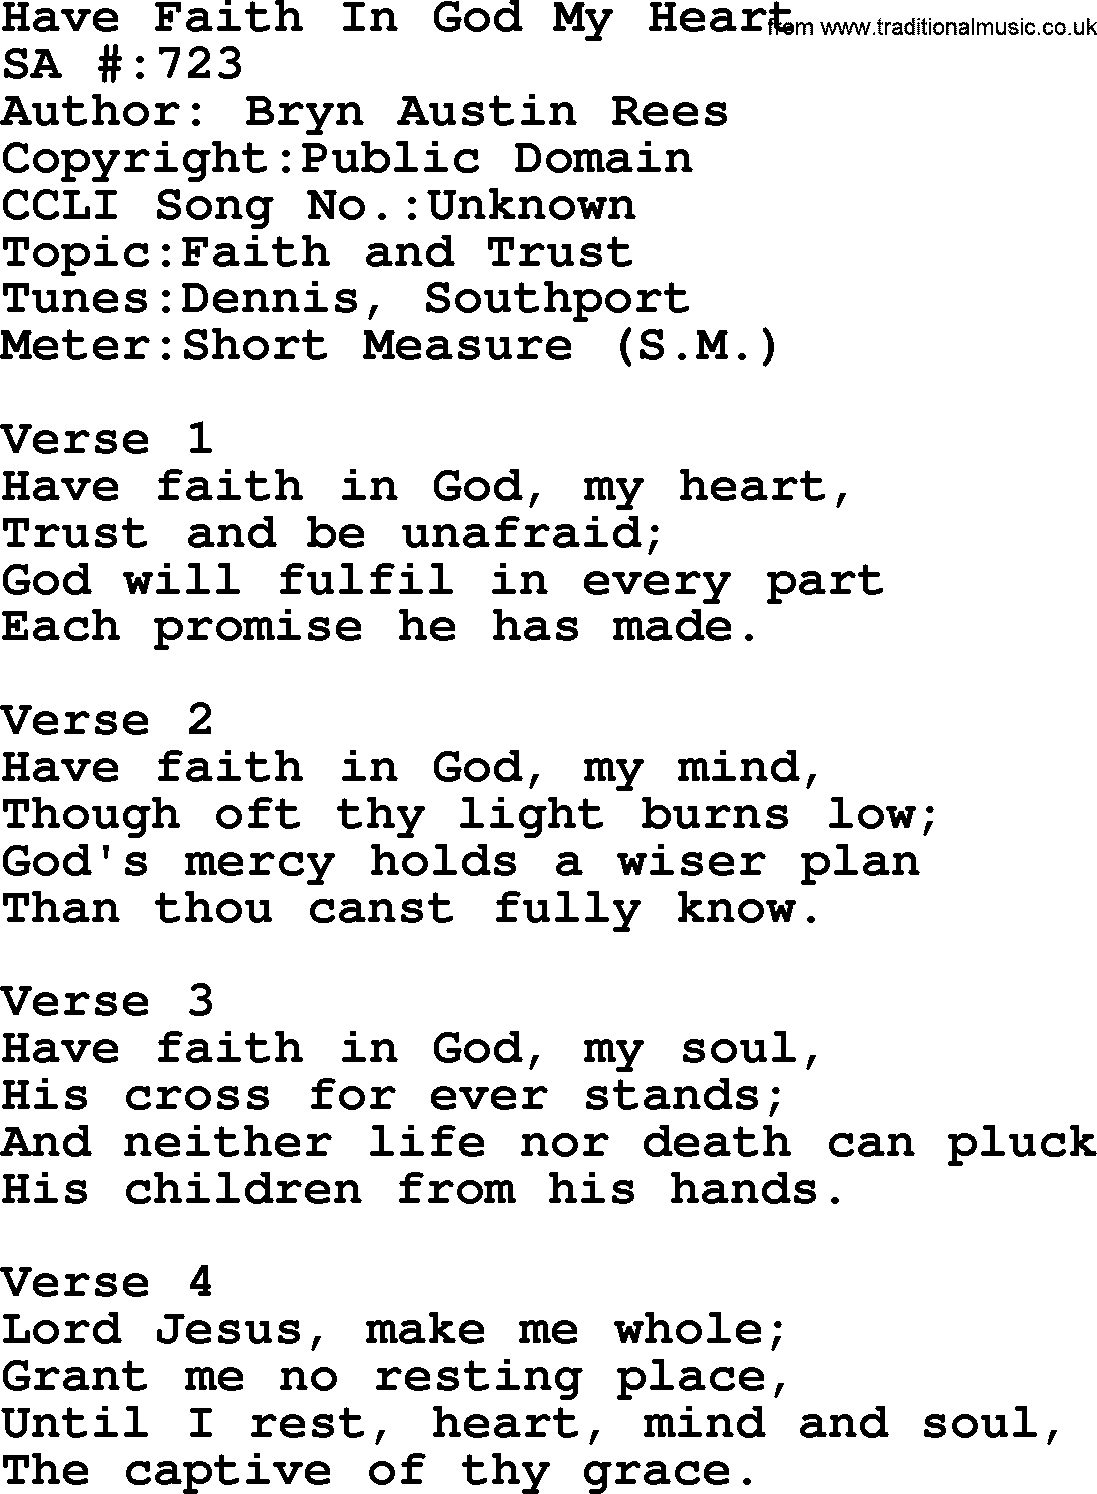 Salvation Army Hymnal, title: Have Faith In God My Heart, with lyrics and PDF,